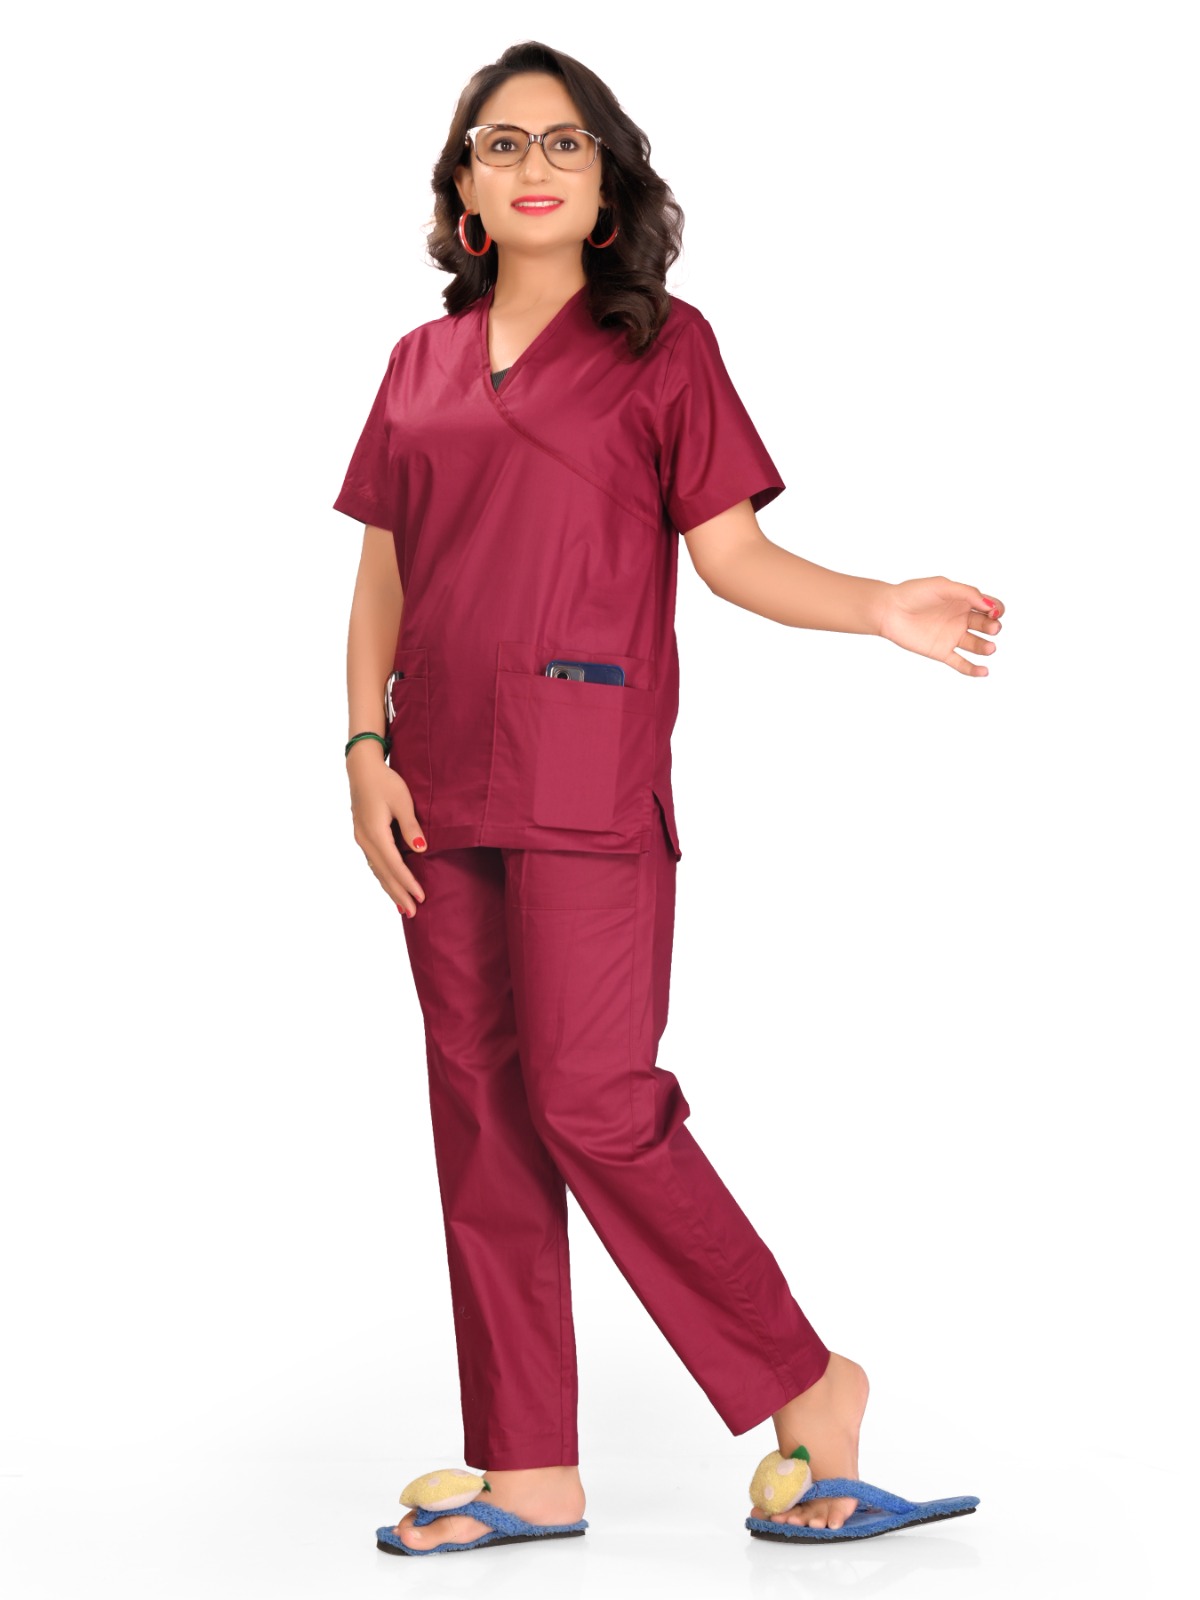 Maroon Scrub Suits for Women